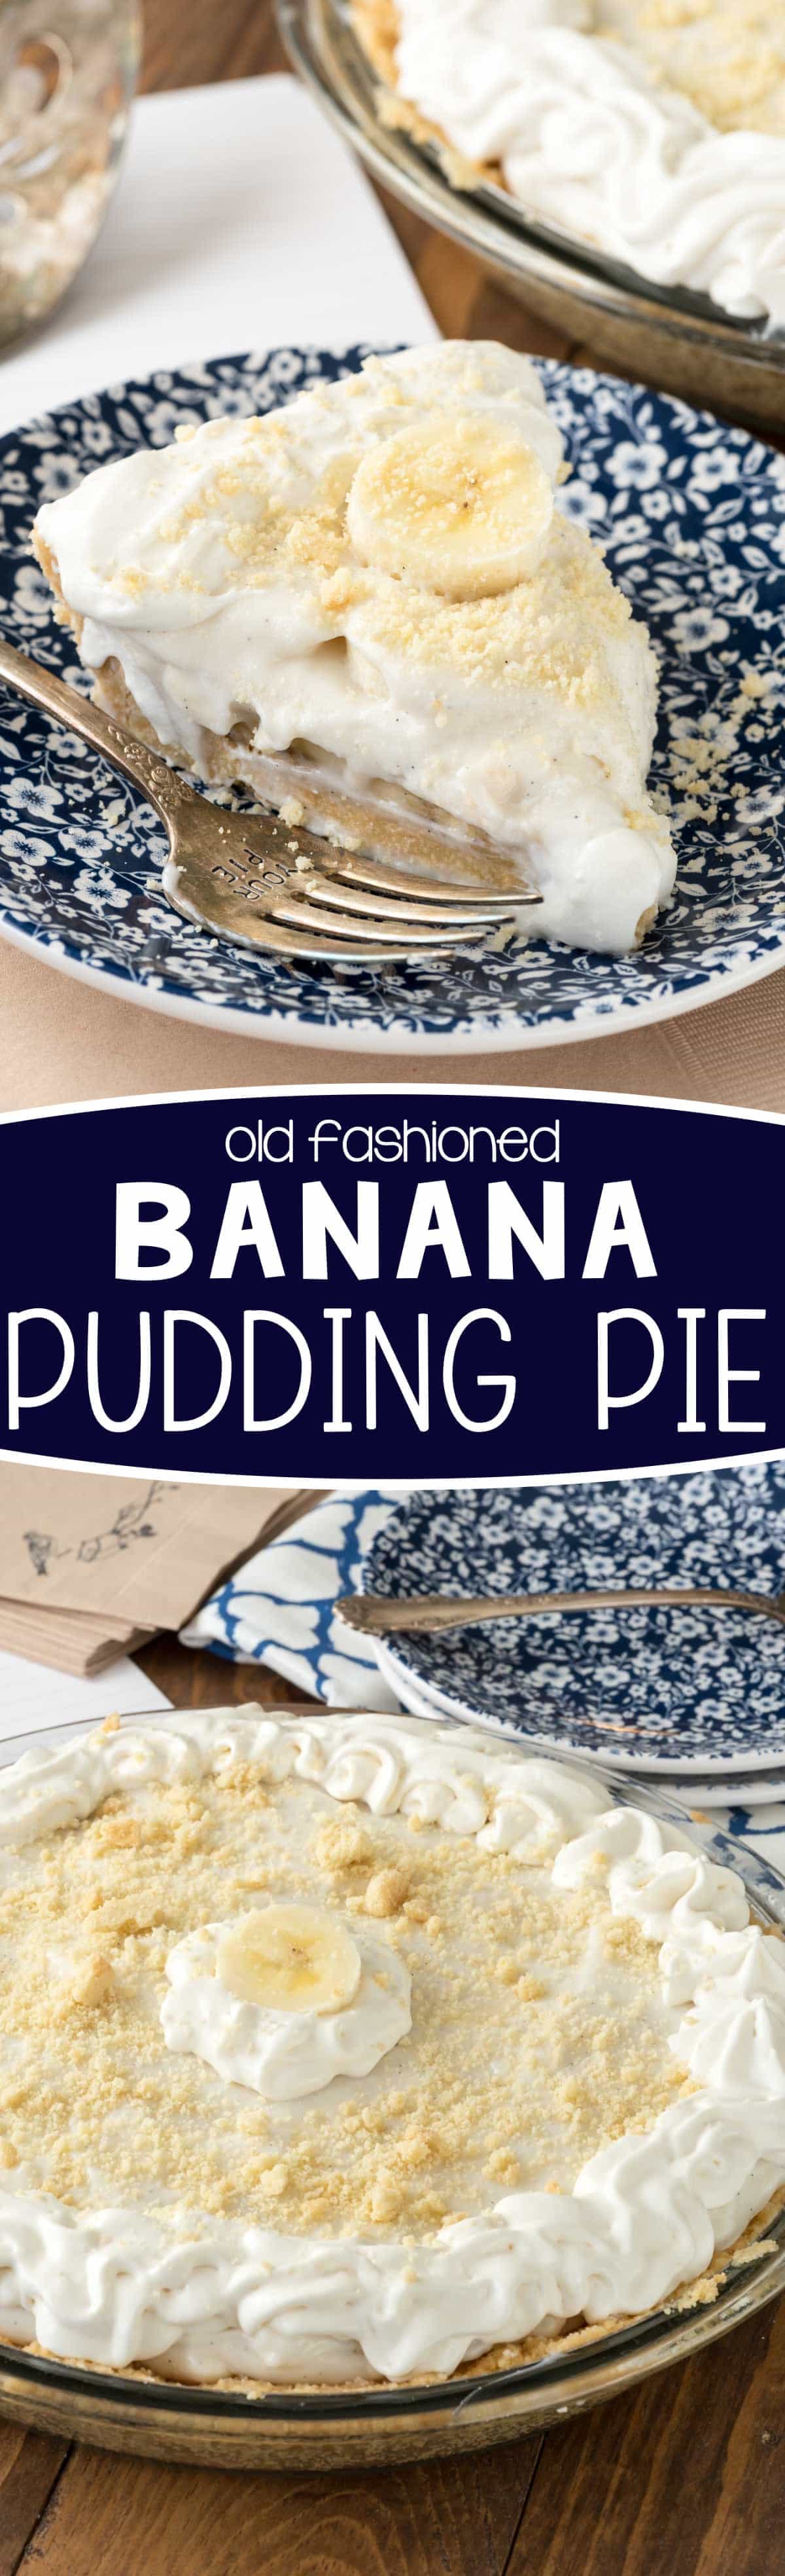 Old Fashioned Banana Pudding Pie - this easy pie recipe is completely NO BAKE! Shortbread crust, homemade pudding and whipped cream, layered with bananas. We couldn't stop eating this pie!